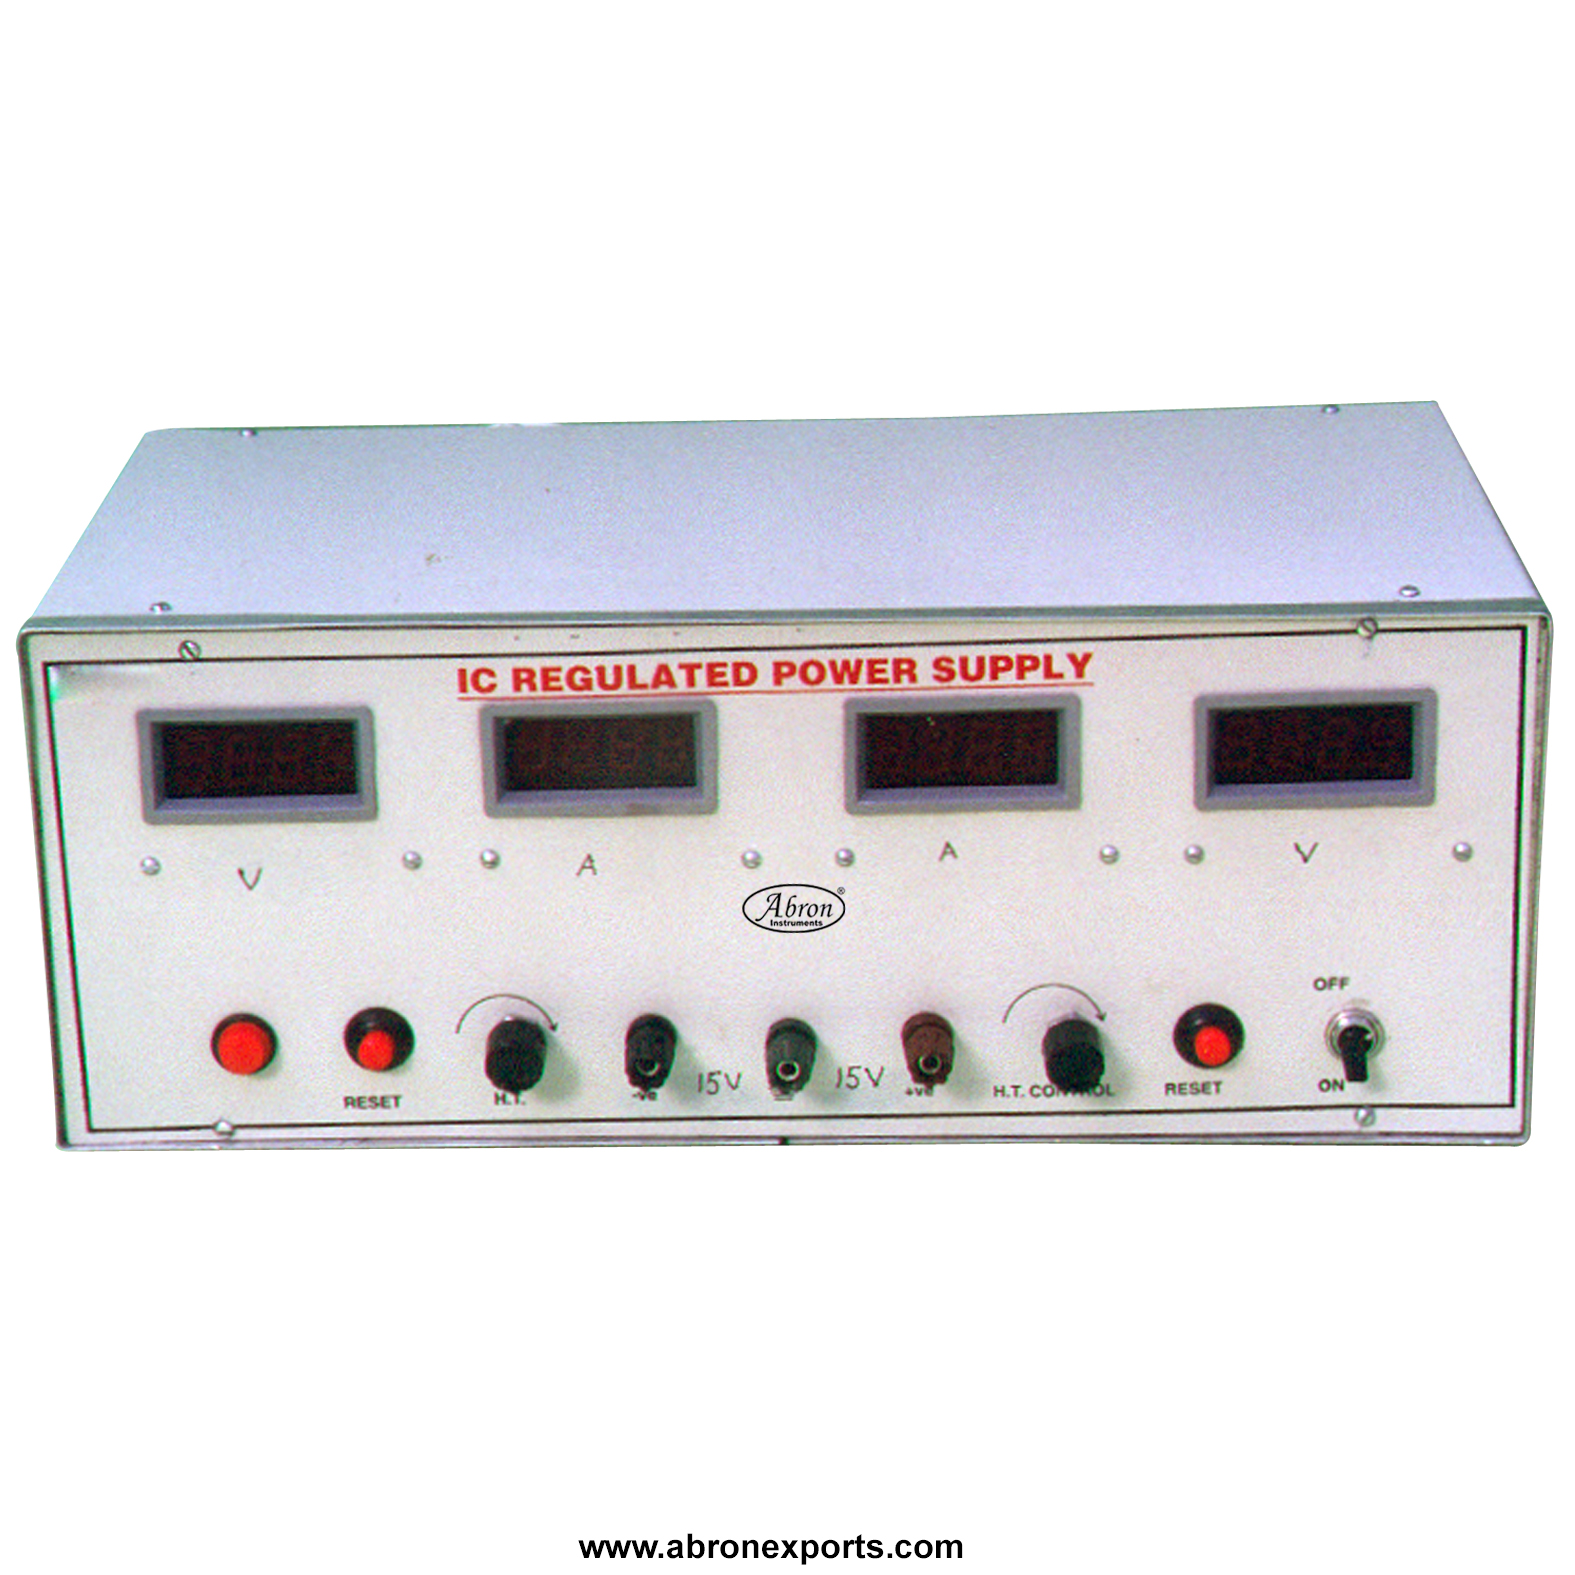 Power supply digital IC regulated 15 0 15v dc variable HT short circuit protection 4 led meter abron AE-1375-c3